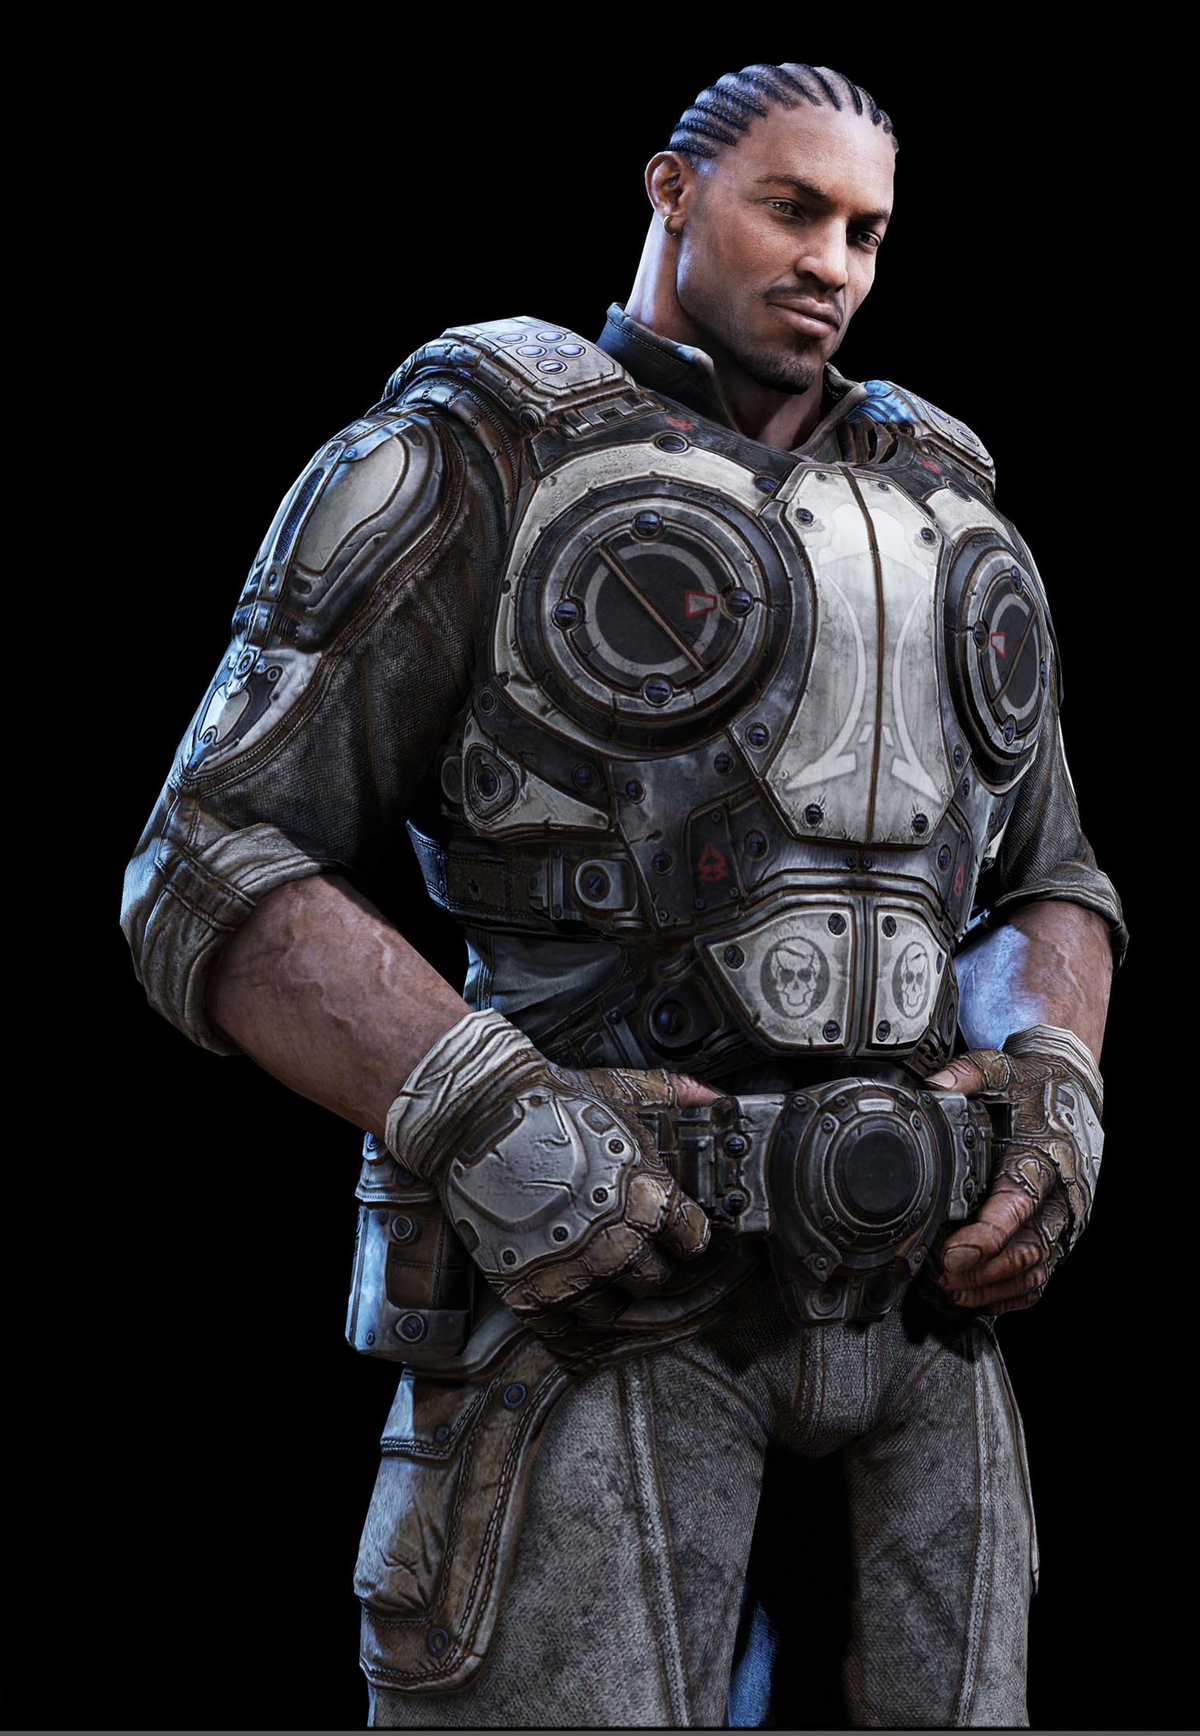 Soon: Toys 'R' Us Exclusive Best of Gears of War Action Figure Assortment –